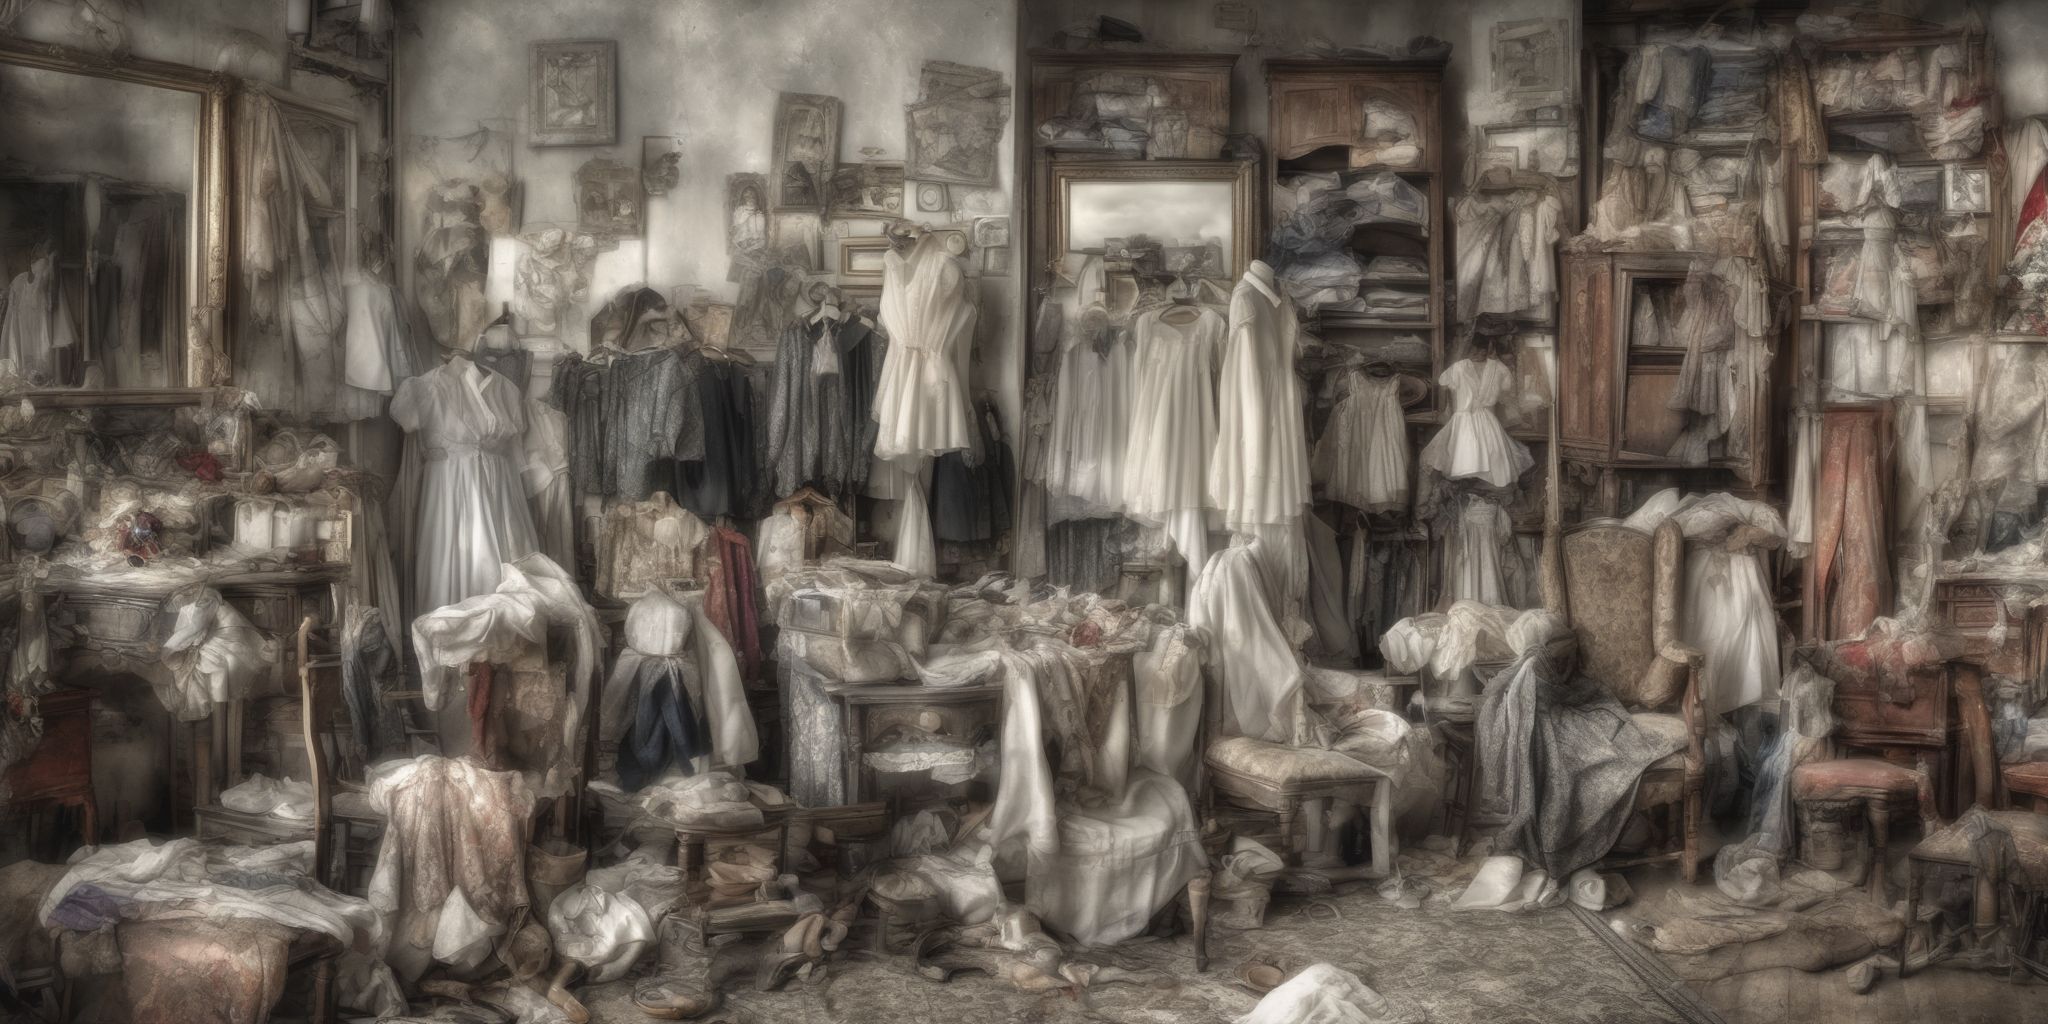 Alterations  in realistic, photographic style